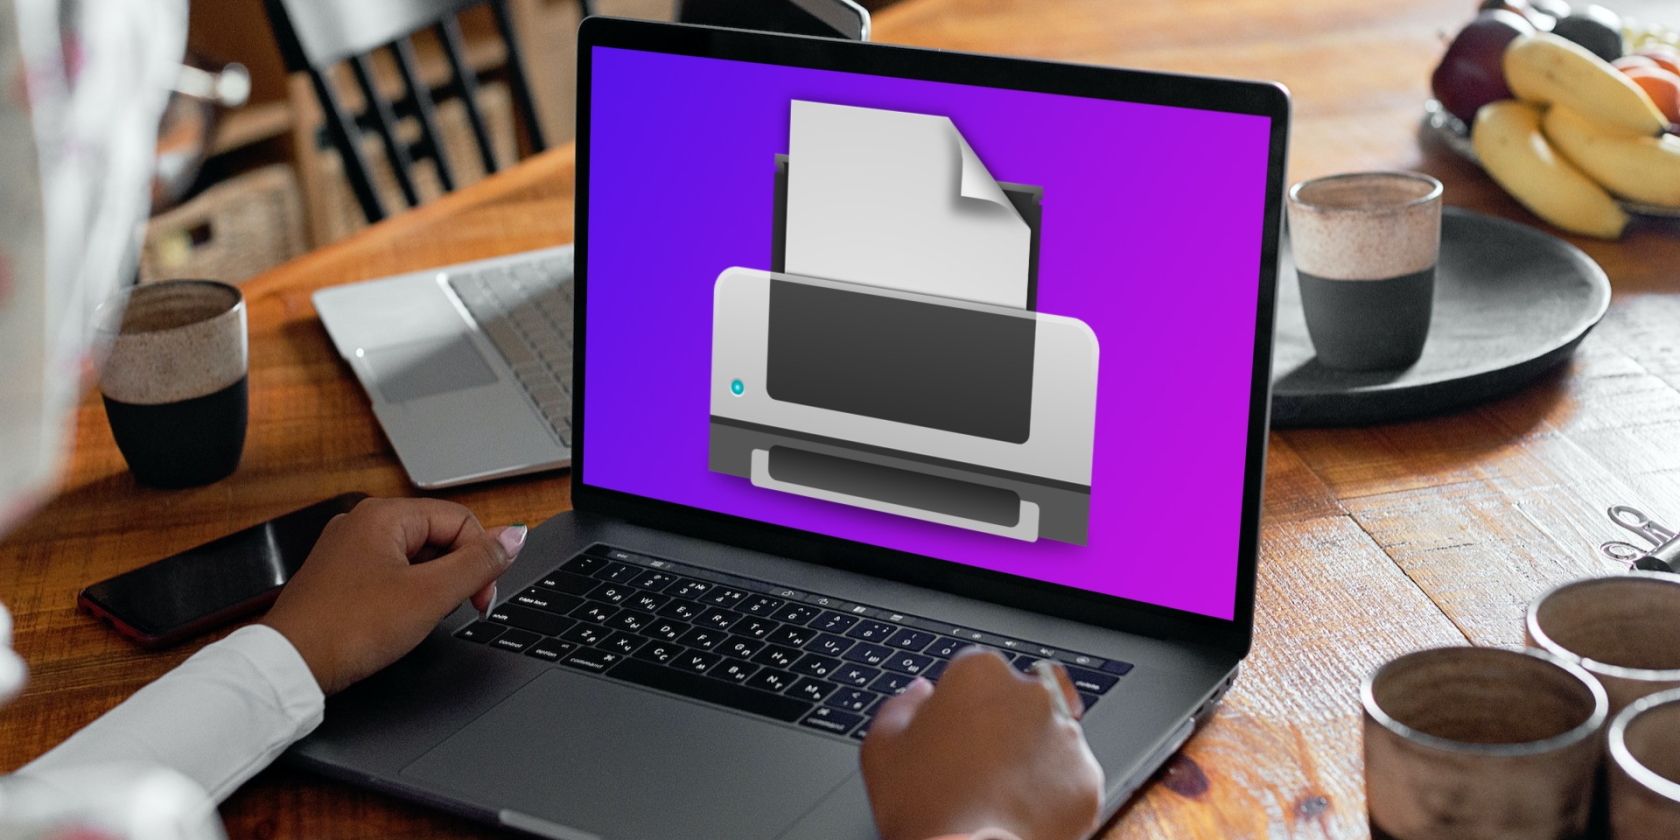 Large printer icon on a MacBook screen